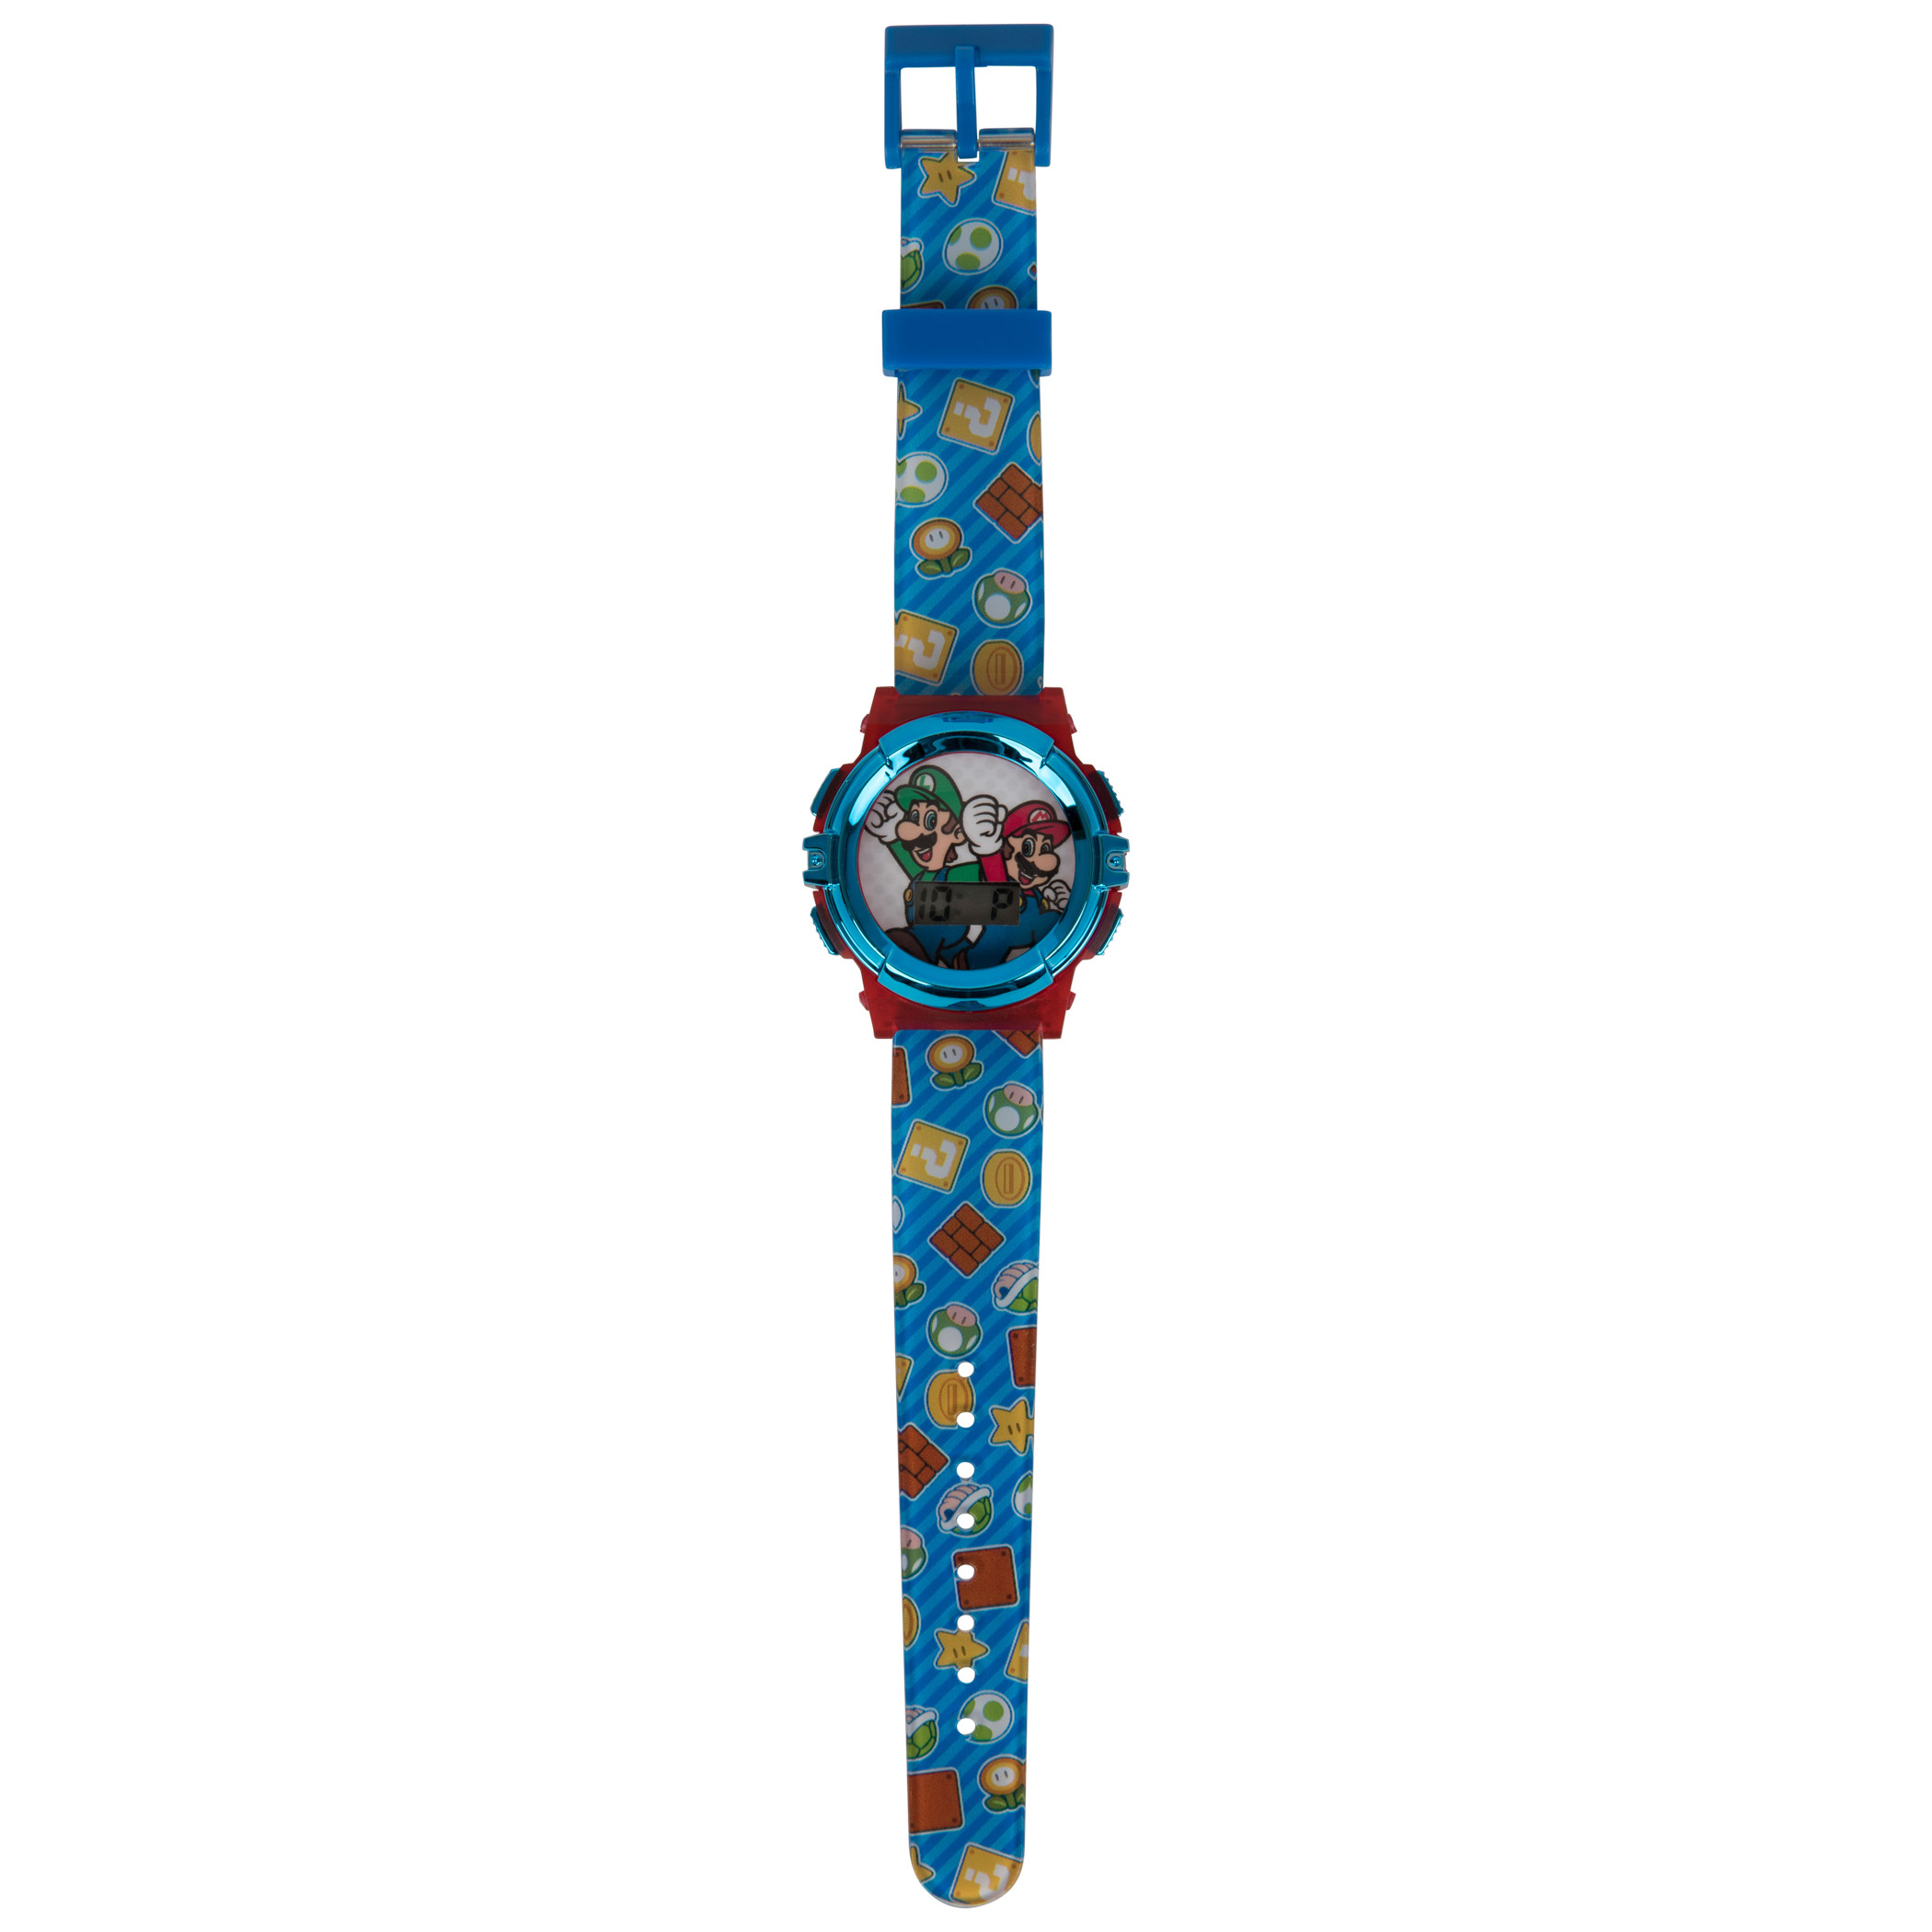 Super Mario Bros. Team Up and Power Up LCD Watch with Rubber Straps